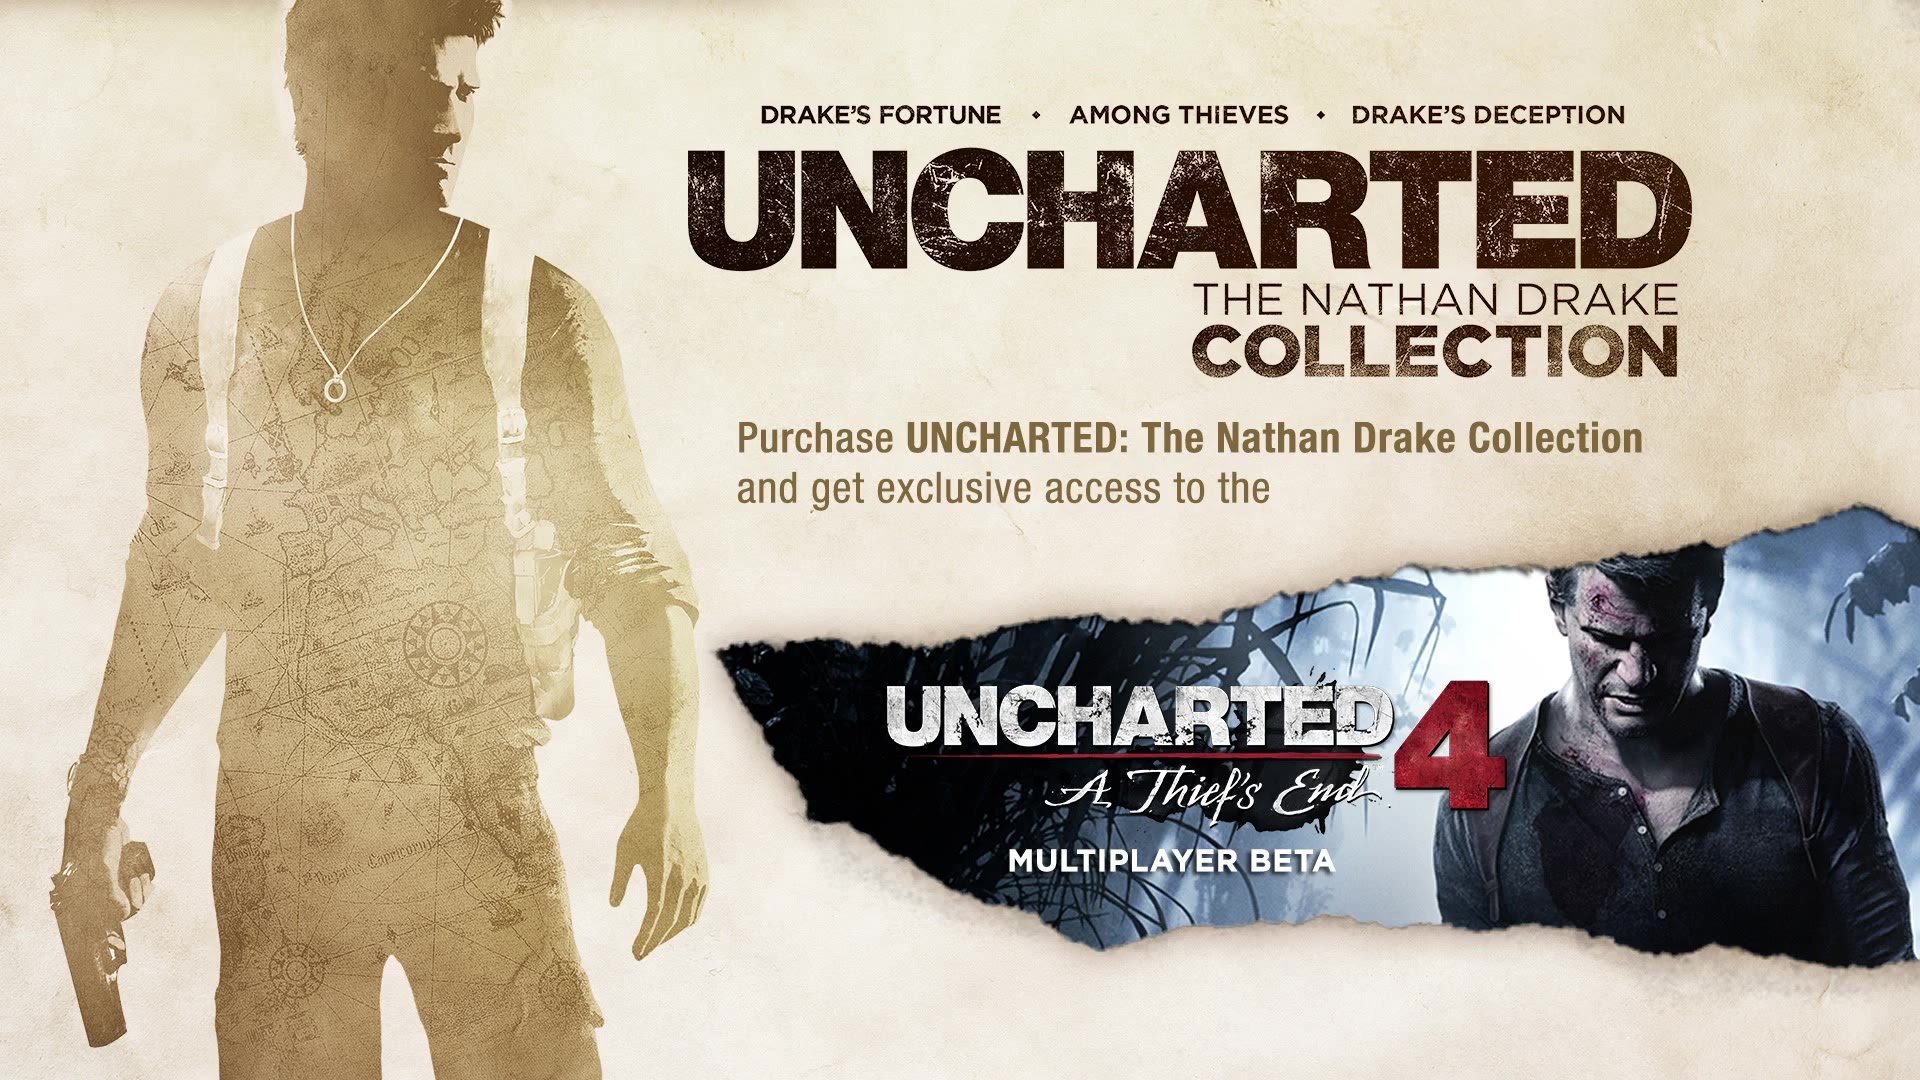 Free download image id x for your desktop mobile tablet explore uncharted nathan drake collection wallpaper drake wallpaper drake backgrounds uncharted wallpaper